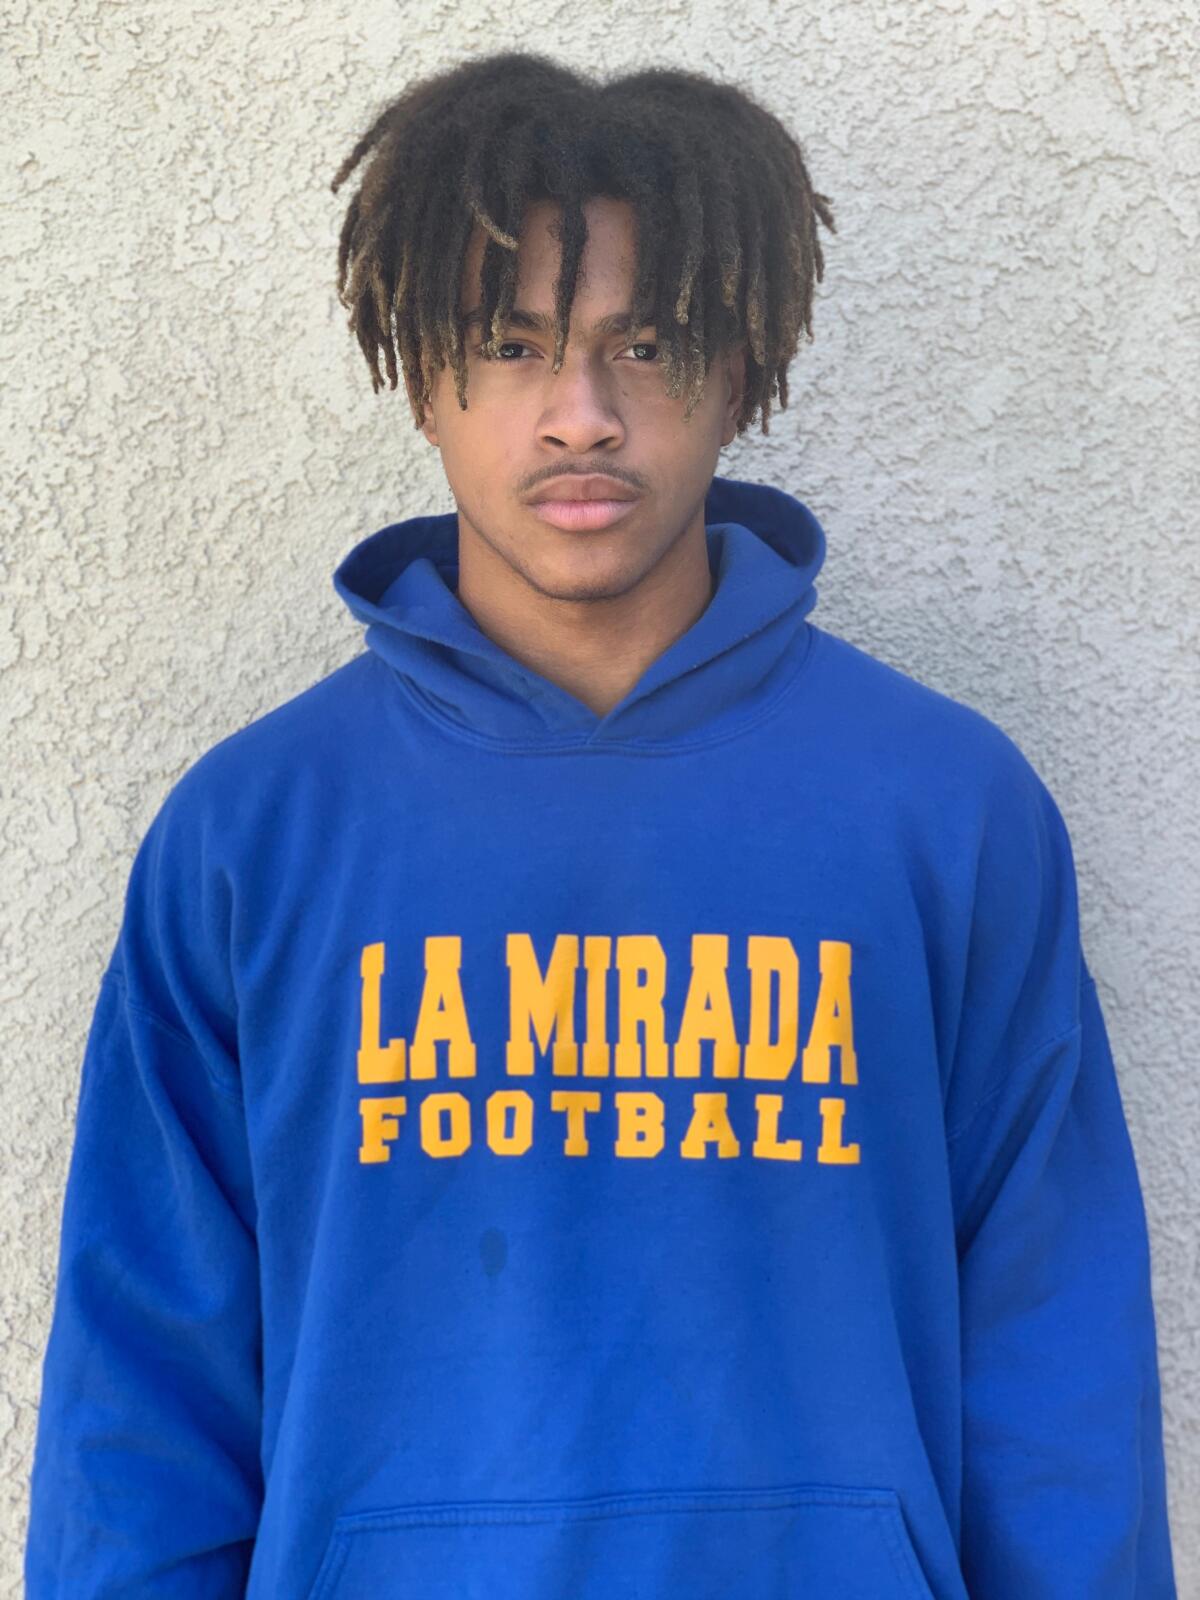 Shaun Grayson of La Mirada is a rising prospect at tight end who signed with UNLV.